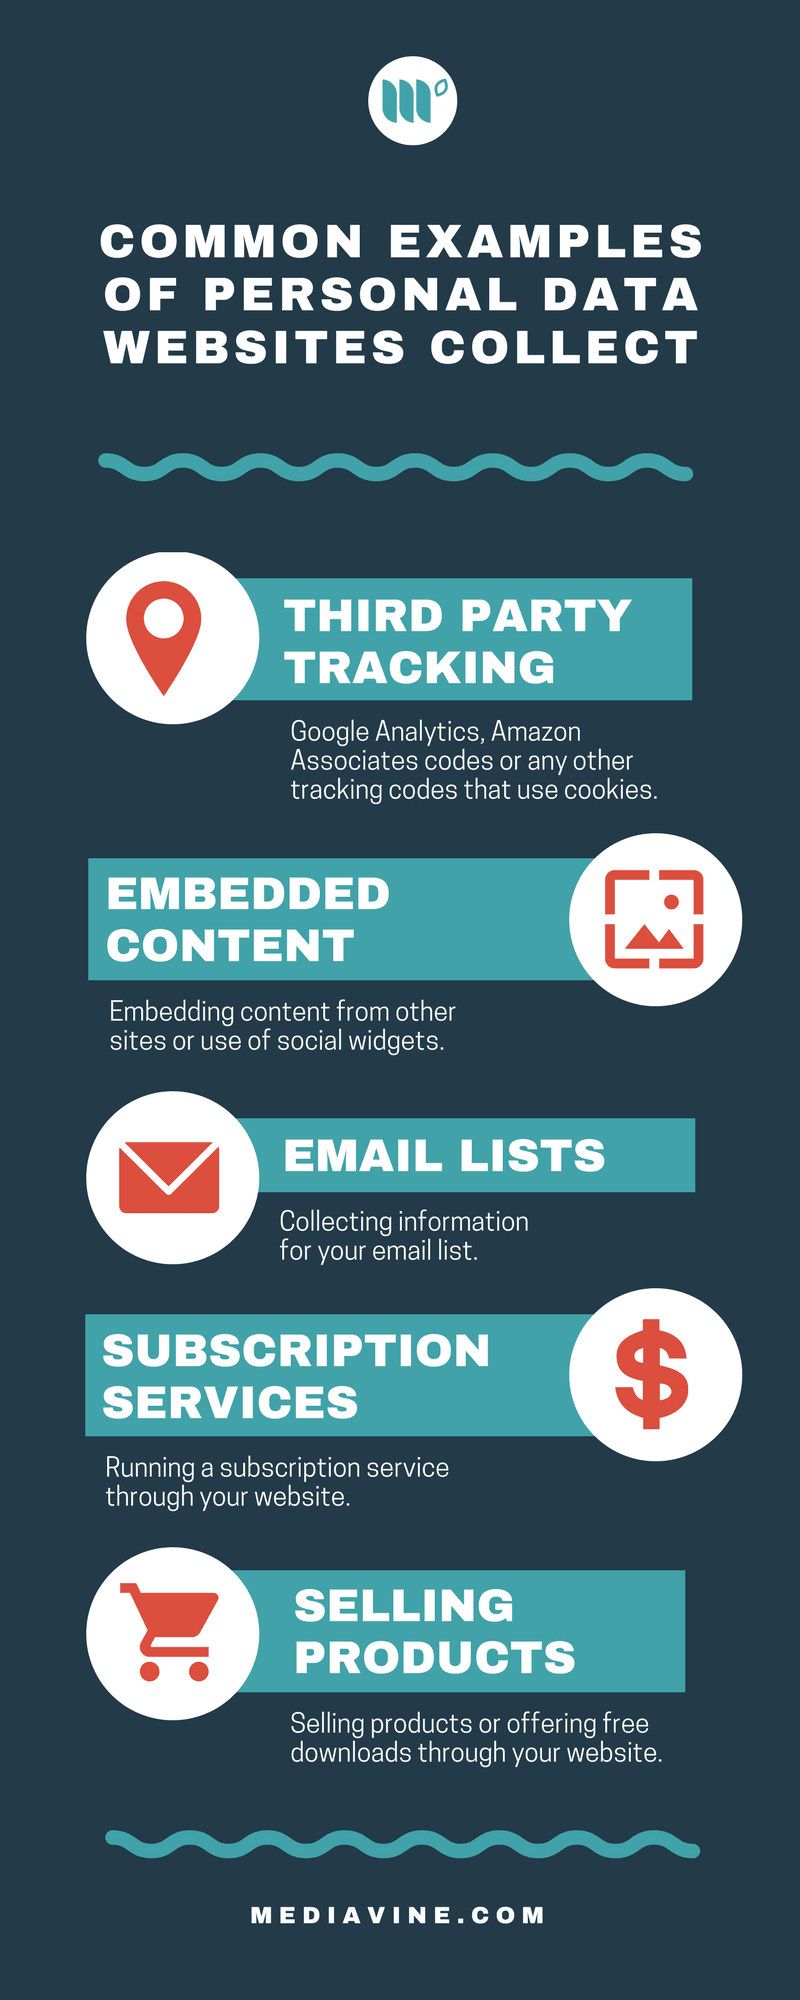 Common examples of personal data websites collect include third party tracking, embedded content, email lists, subscription services and selling products.